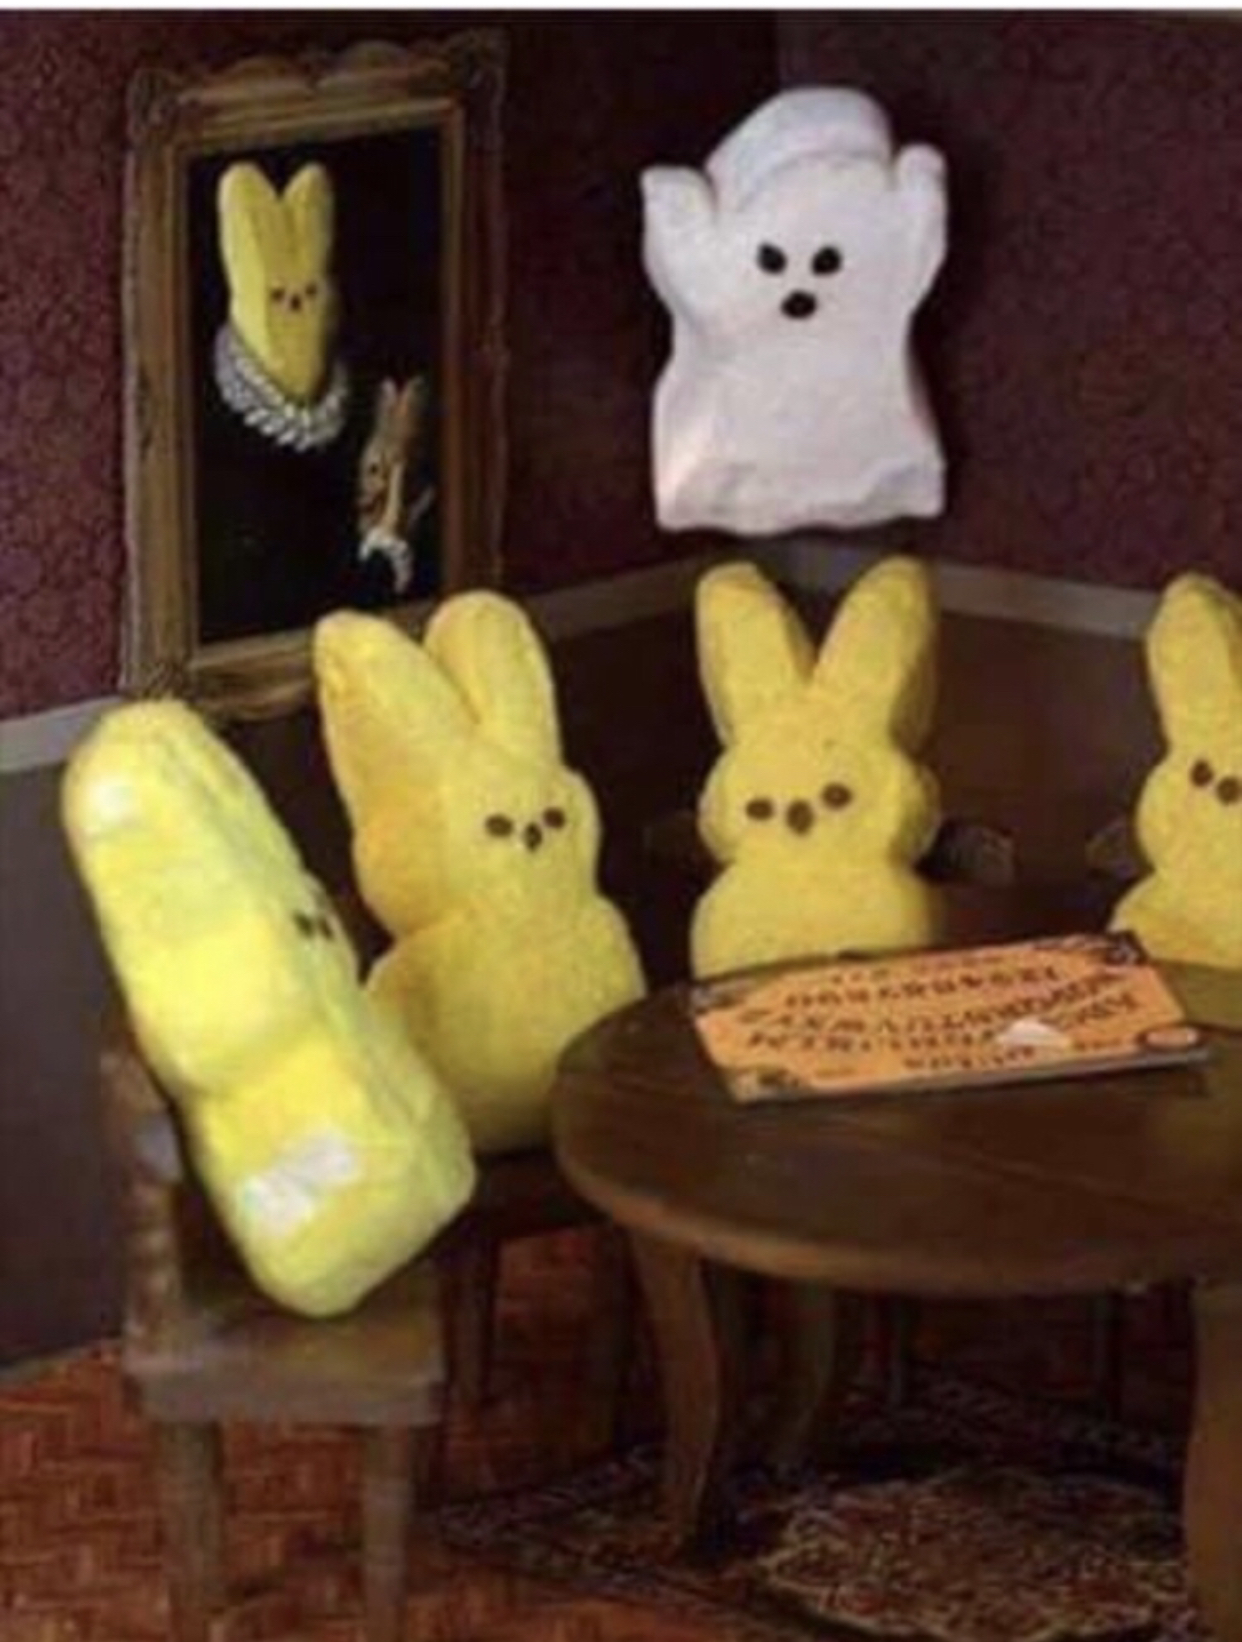 Our favorite table tipping peeps happy Easter peeps ✝️